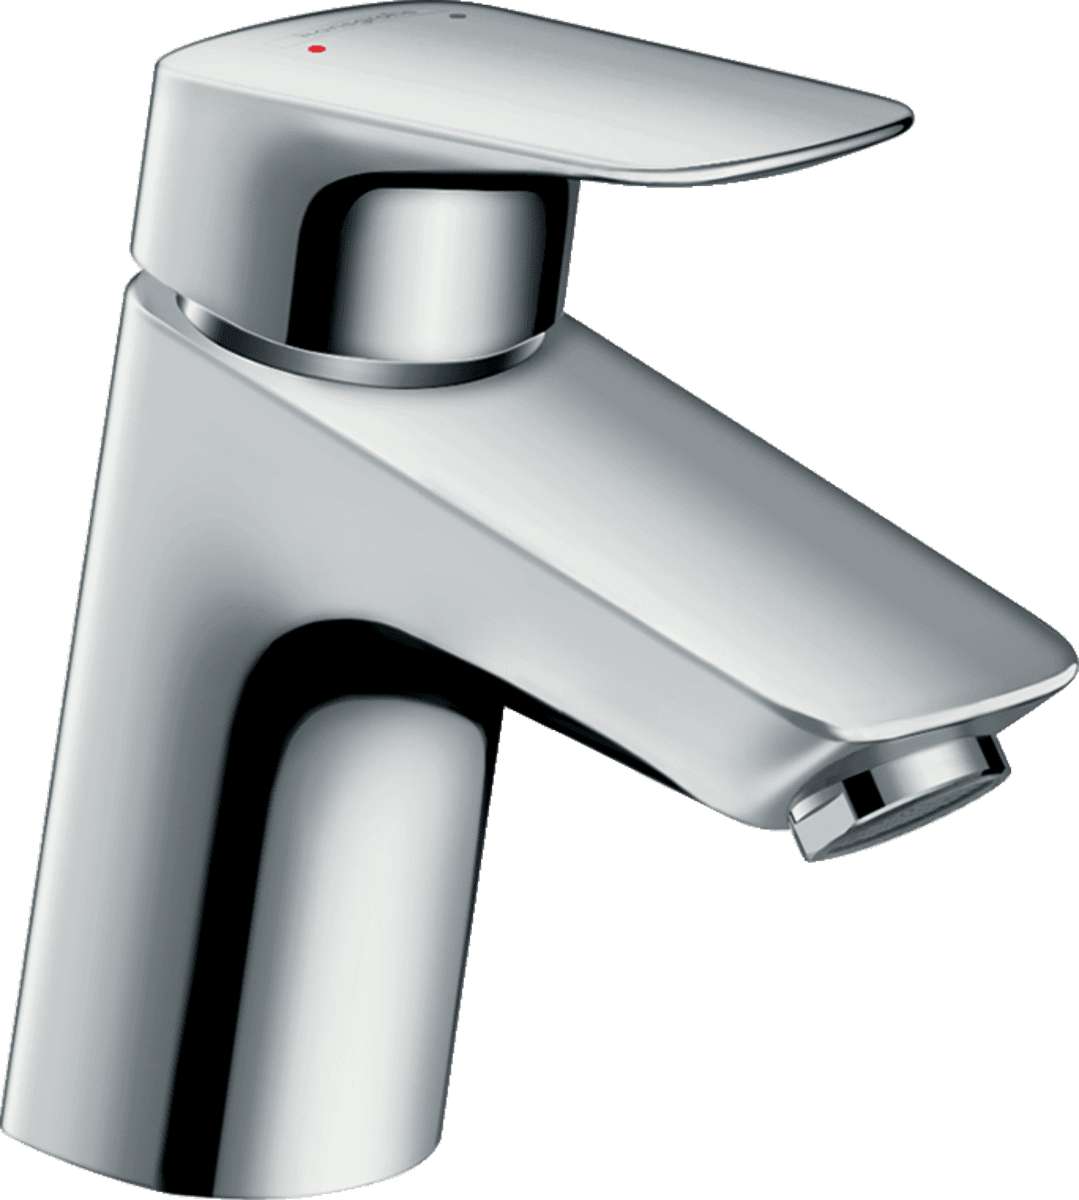 Picture of HANSGROHE Logis Single lever basin mixer 70 for LowPressure/vented hot water cylinders with push-open waste set #71074000 - Chrome